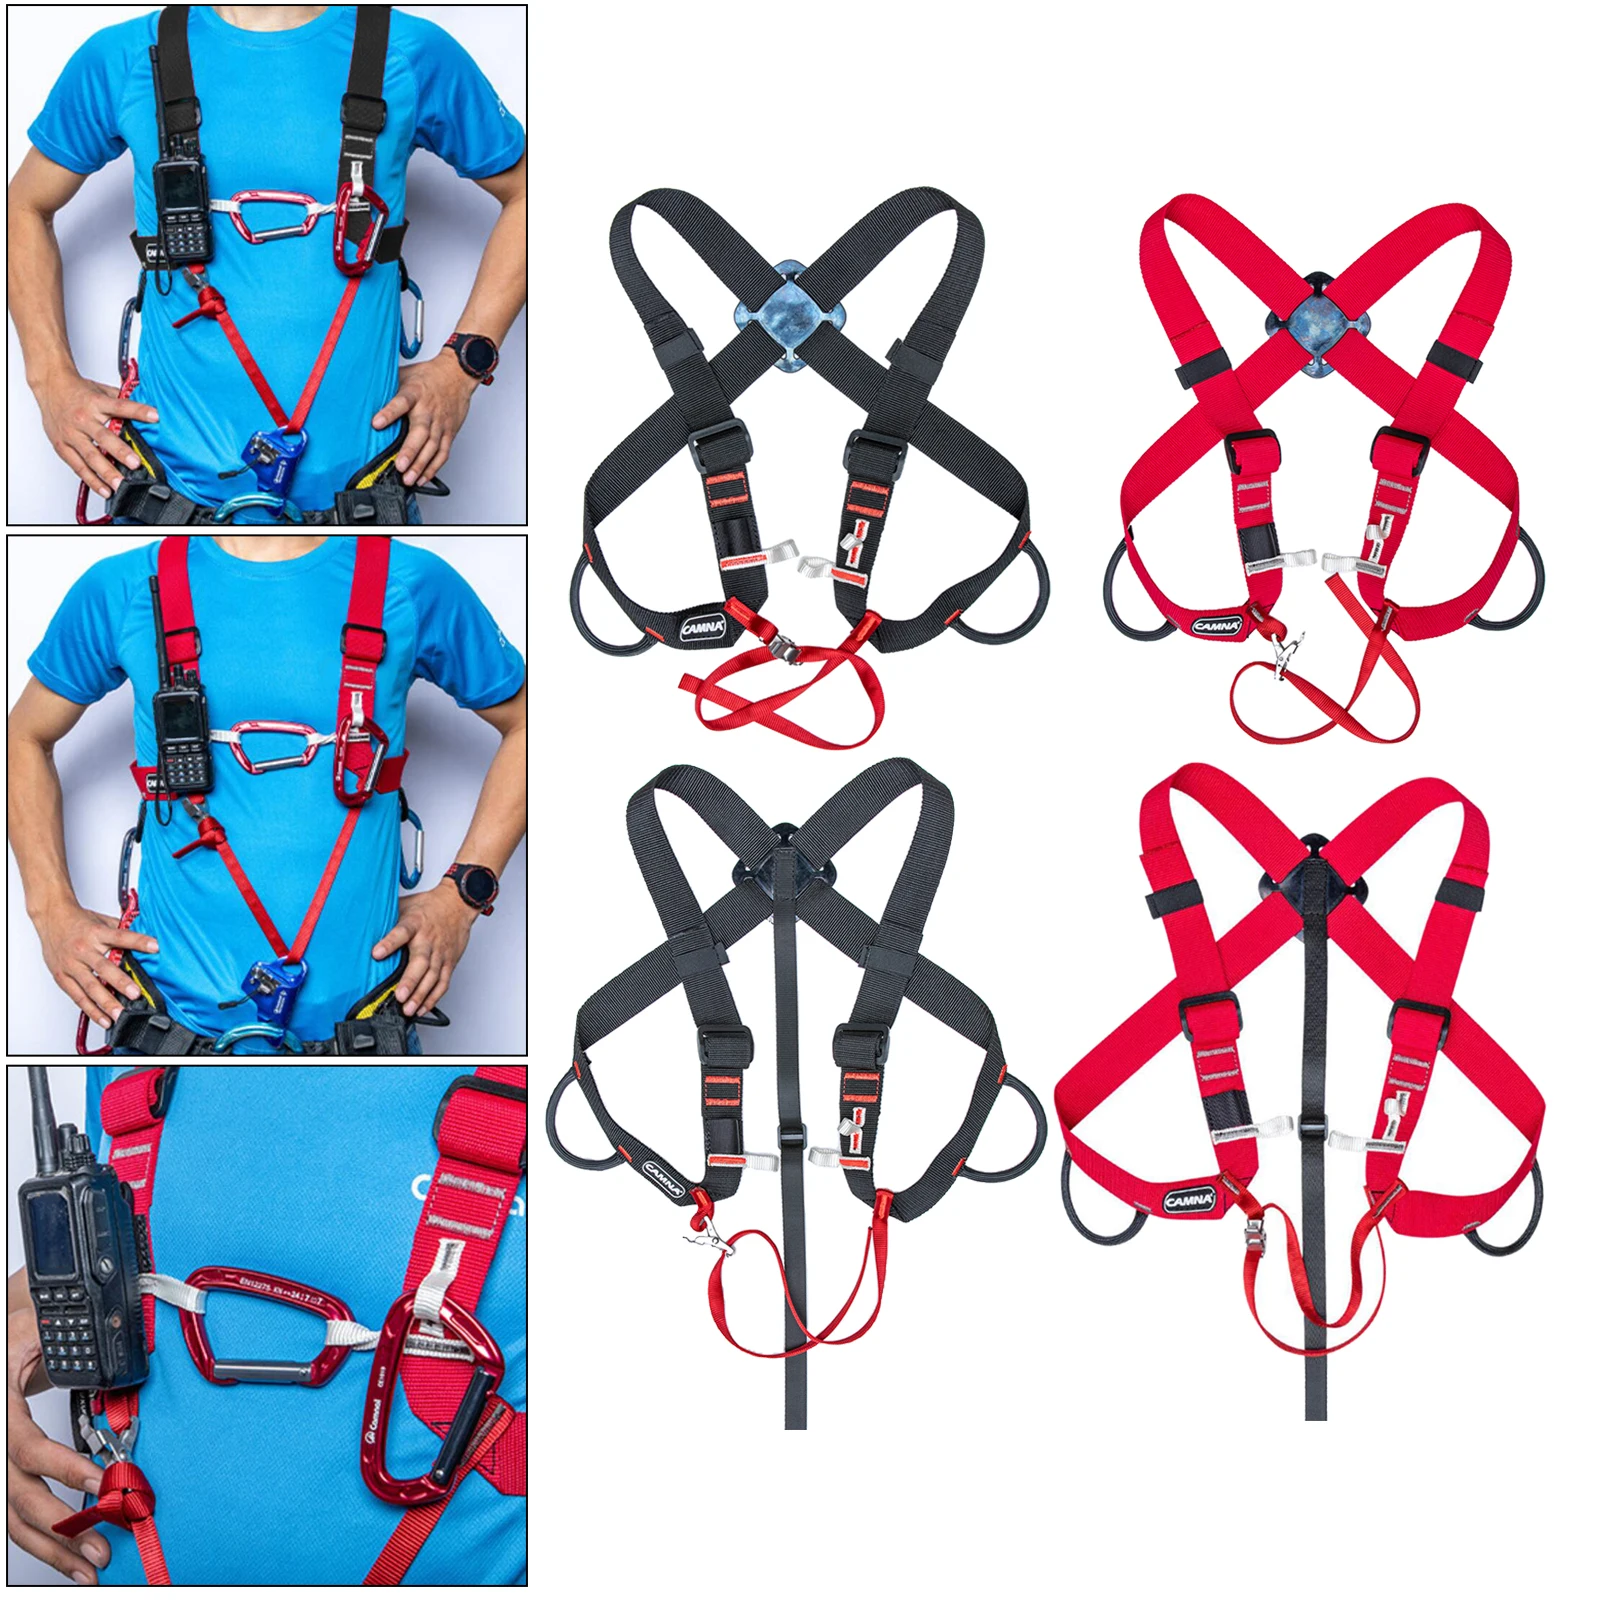 Upper Body Climb Safety Harness Ascending Girdles Chest Fixed Belt Canyoning